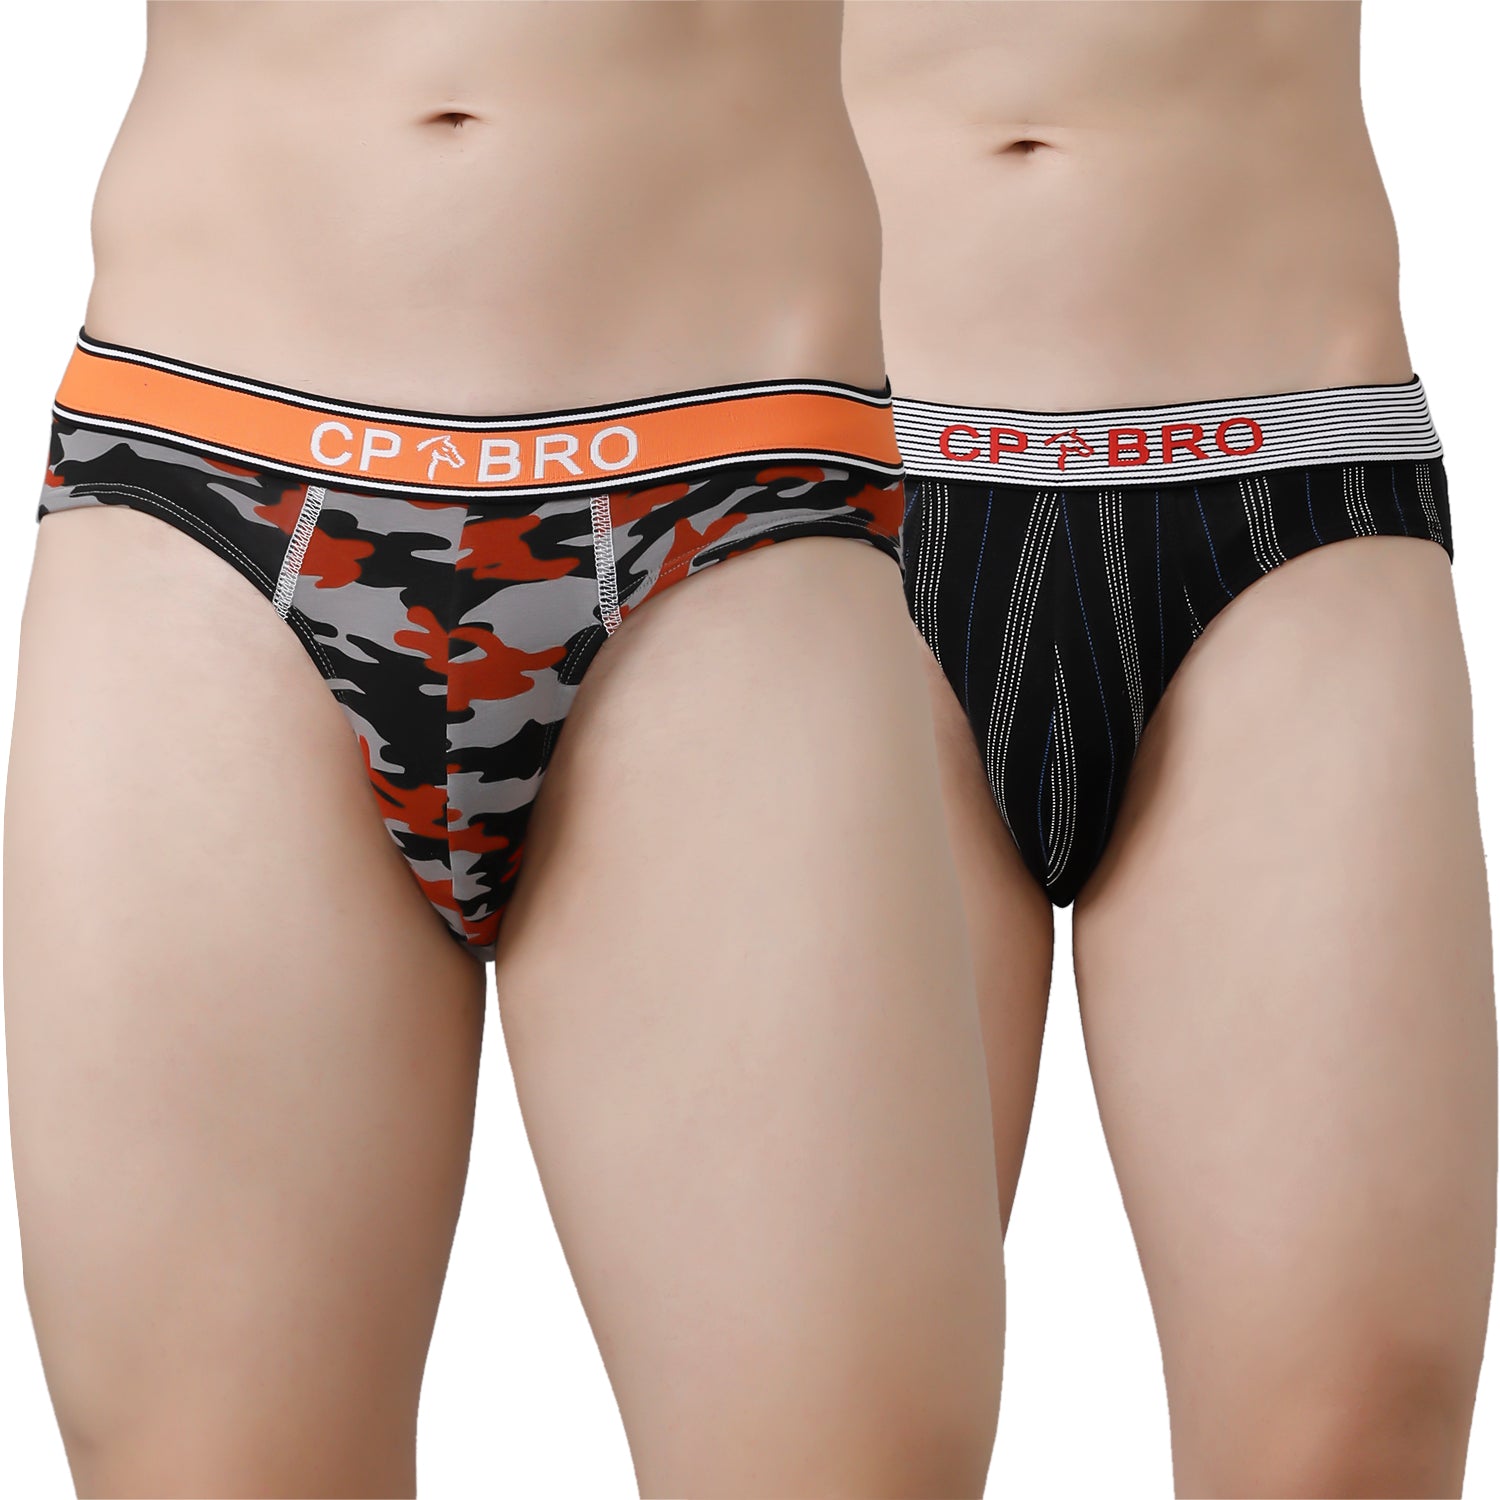 CP BRO Men's Printed Briefs with Exposed Waistband Value Pack - Orange & Black Stripe (Pack of 2)